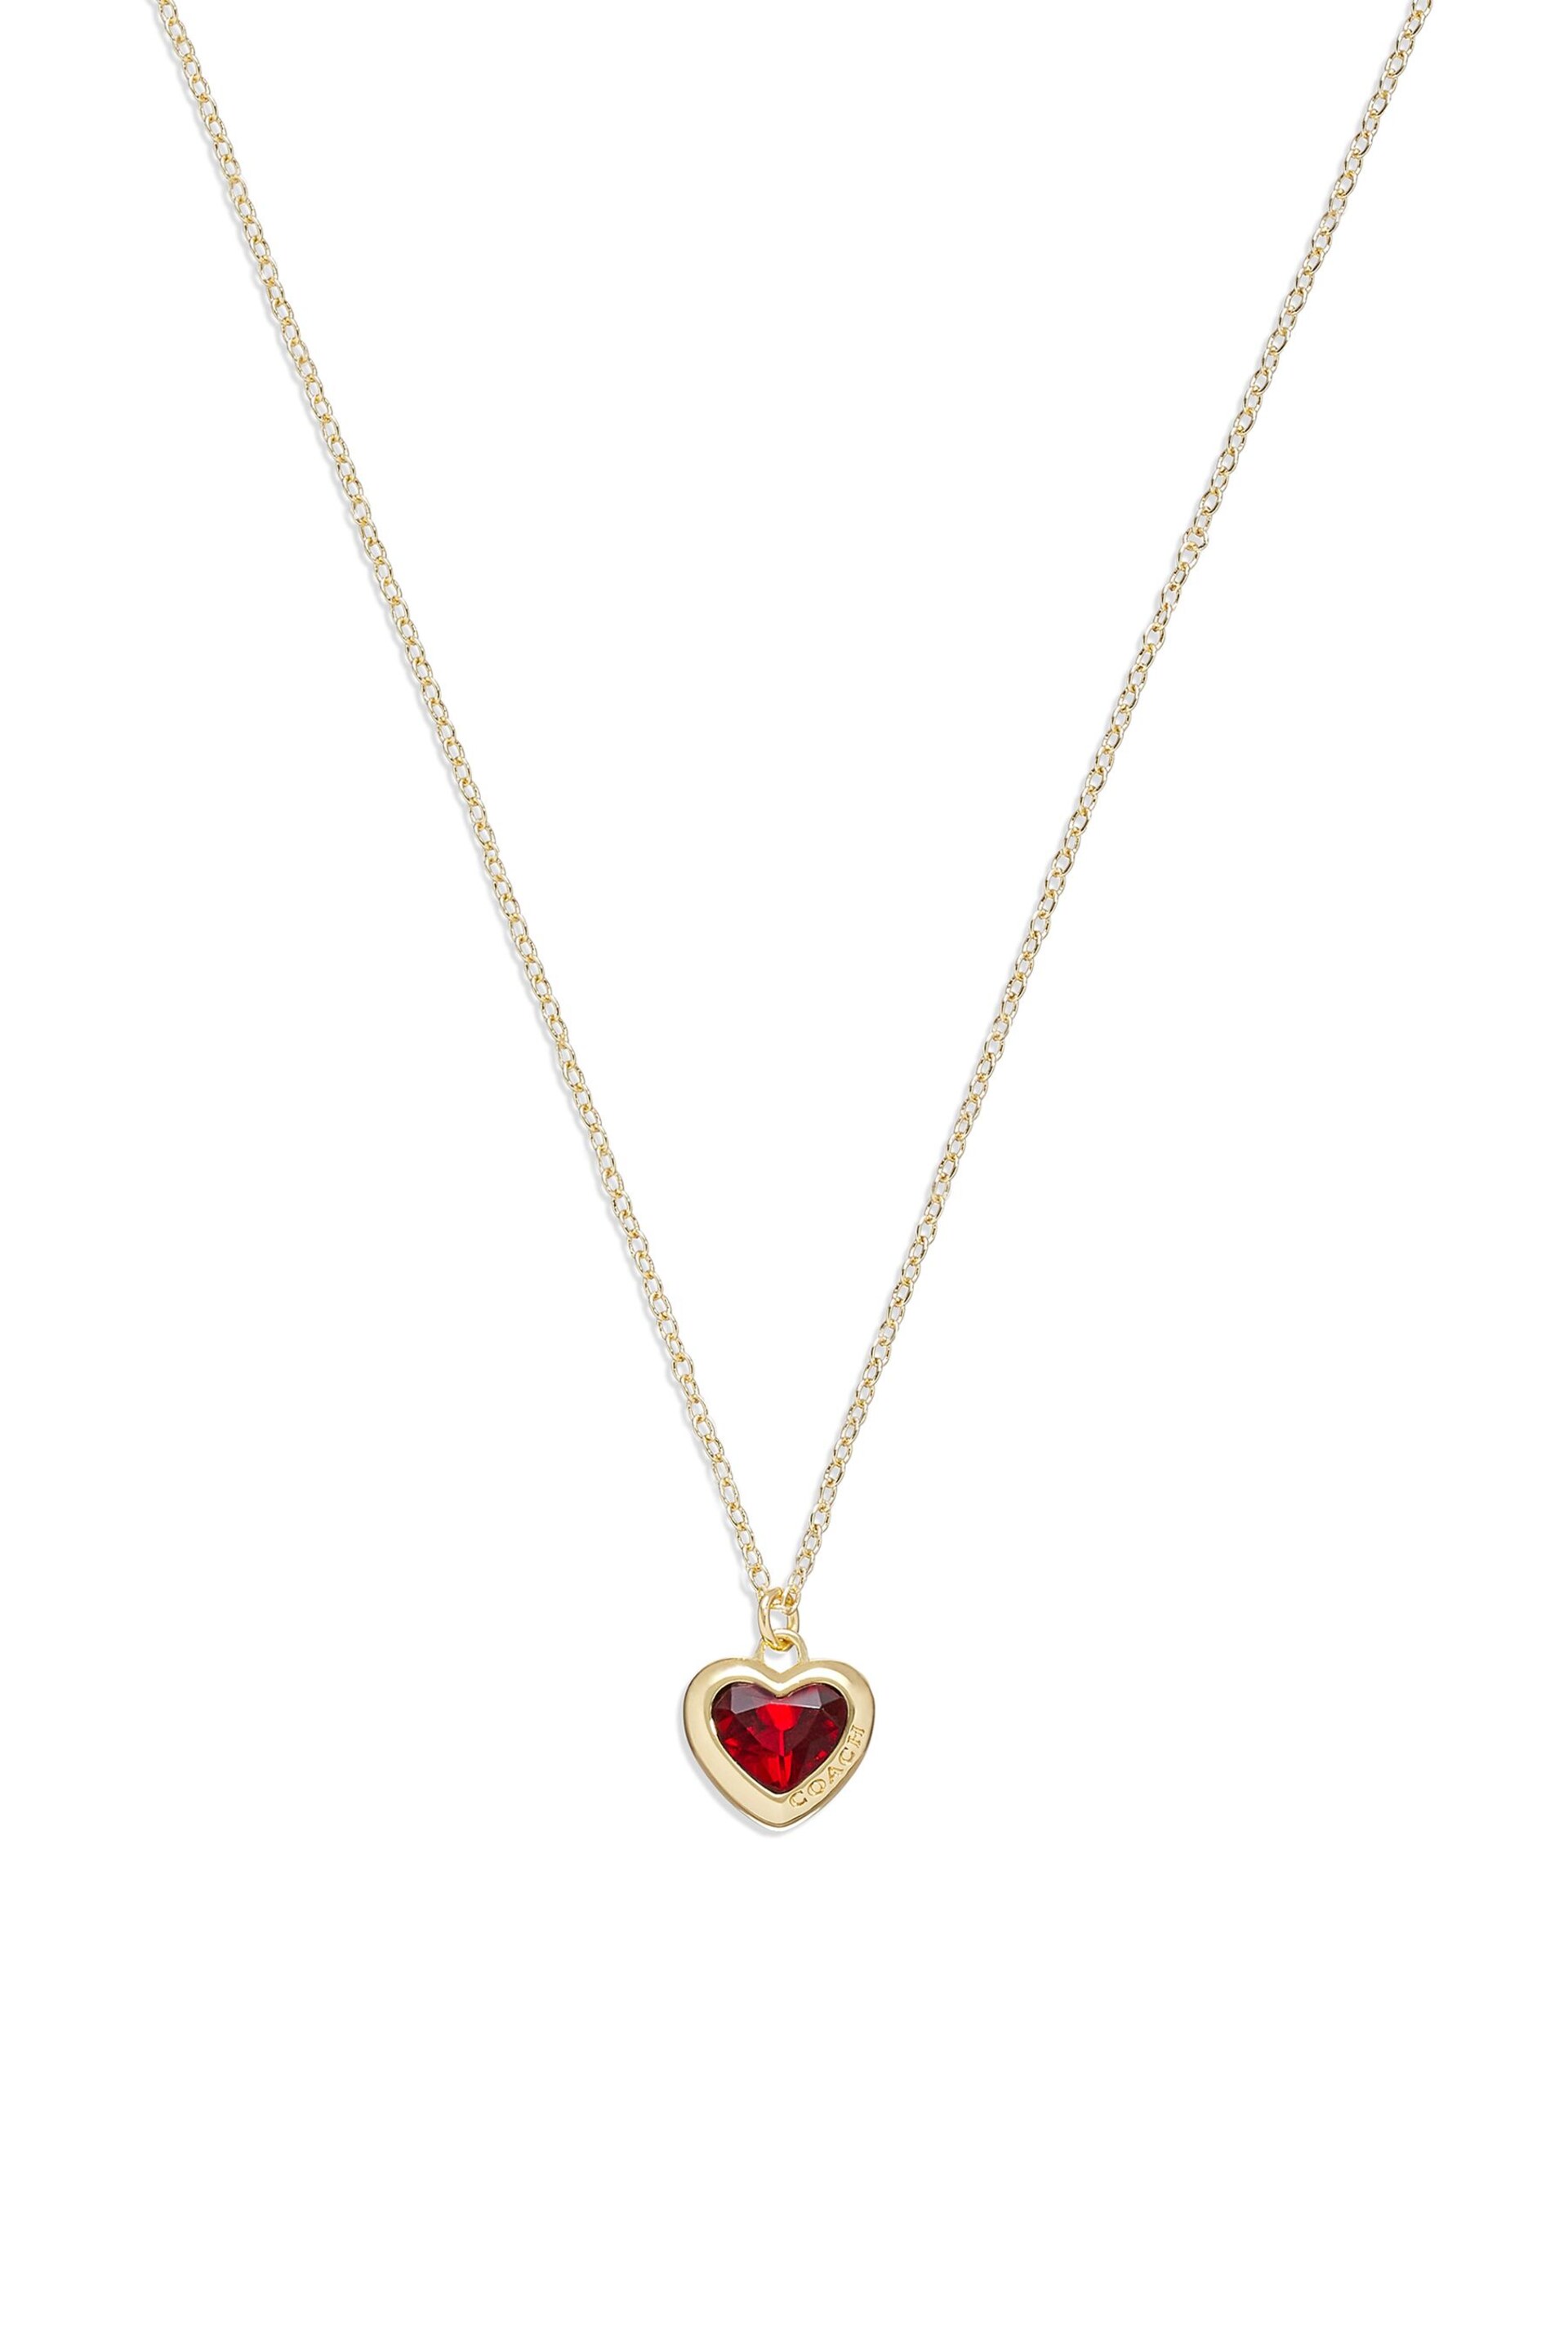 COACH Gold Tone Heart Pendant Necklace - Image 1 of 4